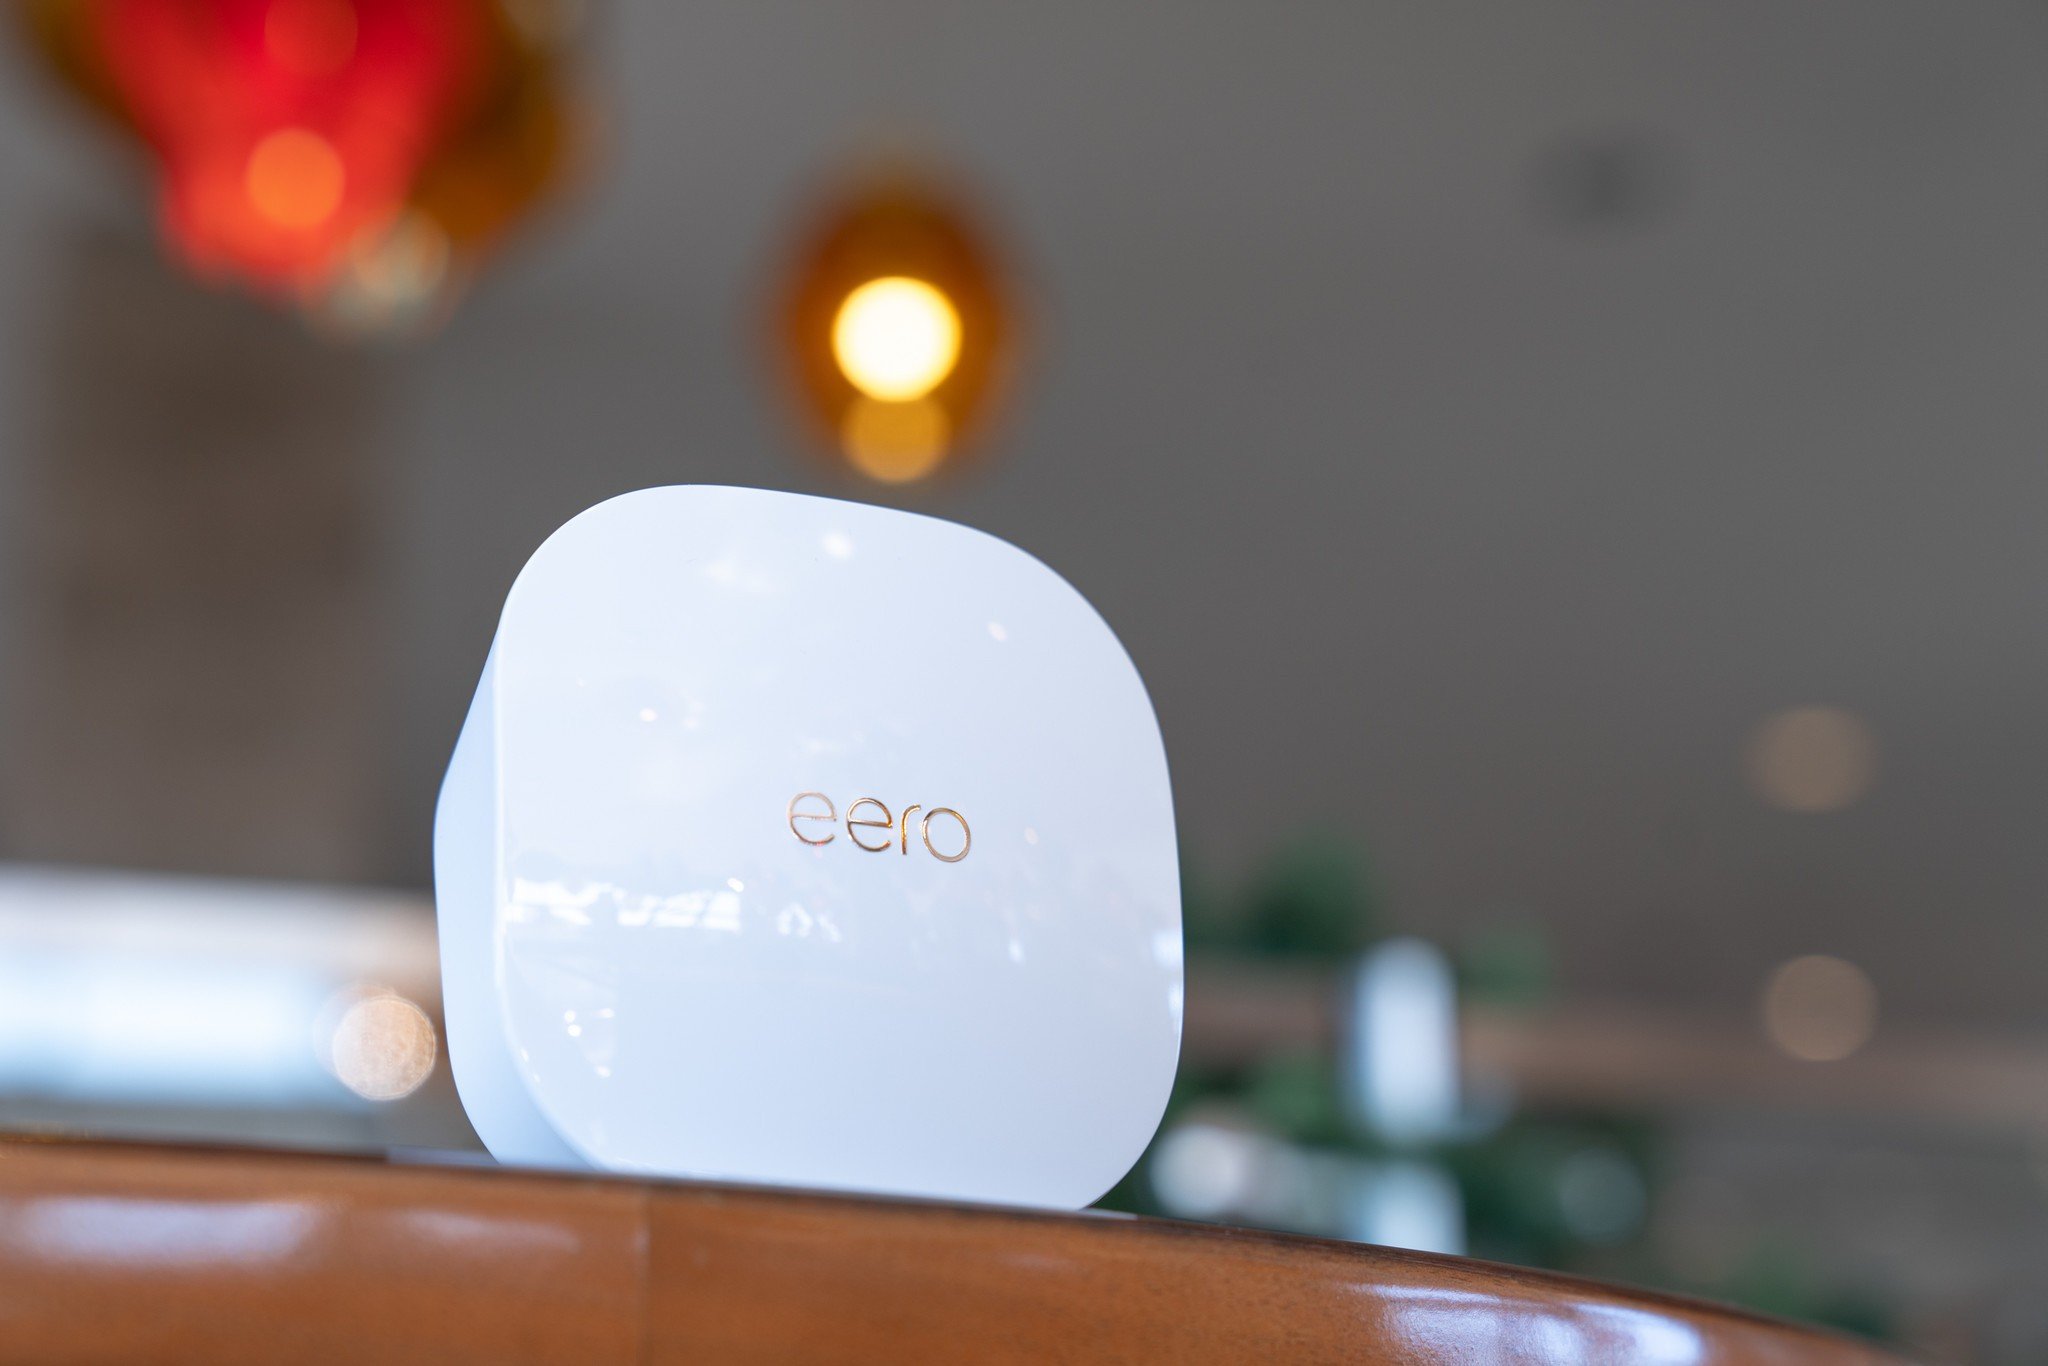 https://www.androidcentral.com/sites/androidcentral.com/files/styles/larger_wm_brw/public/article_images/2019/12/eero-mesh-wifi-gen-3-4.jpg